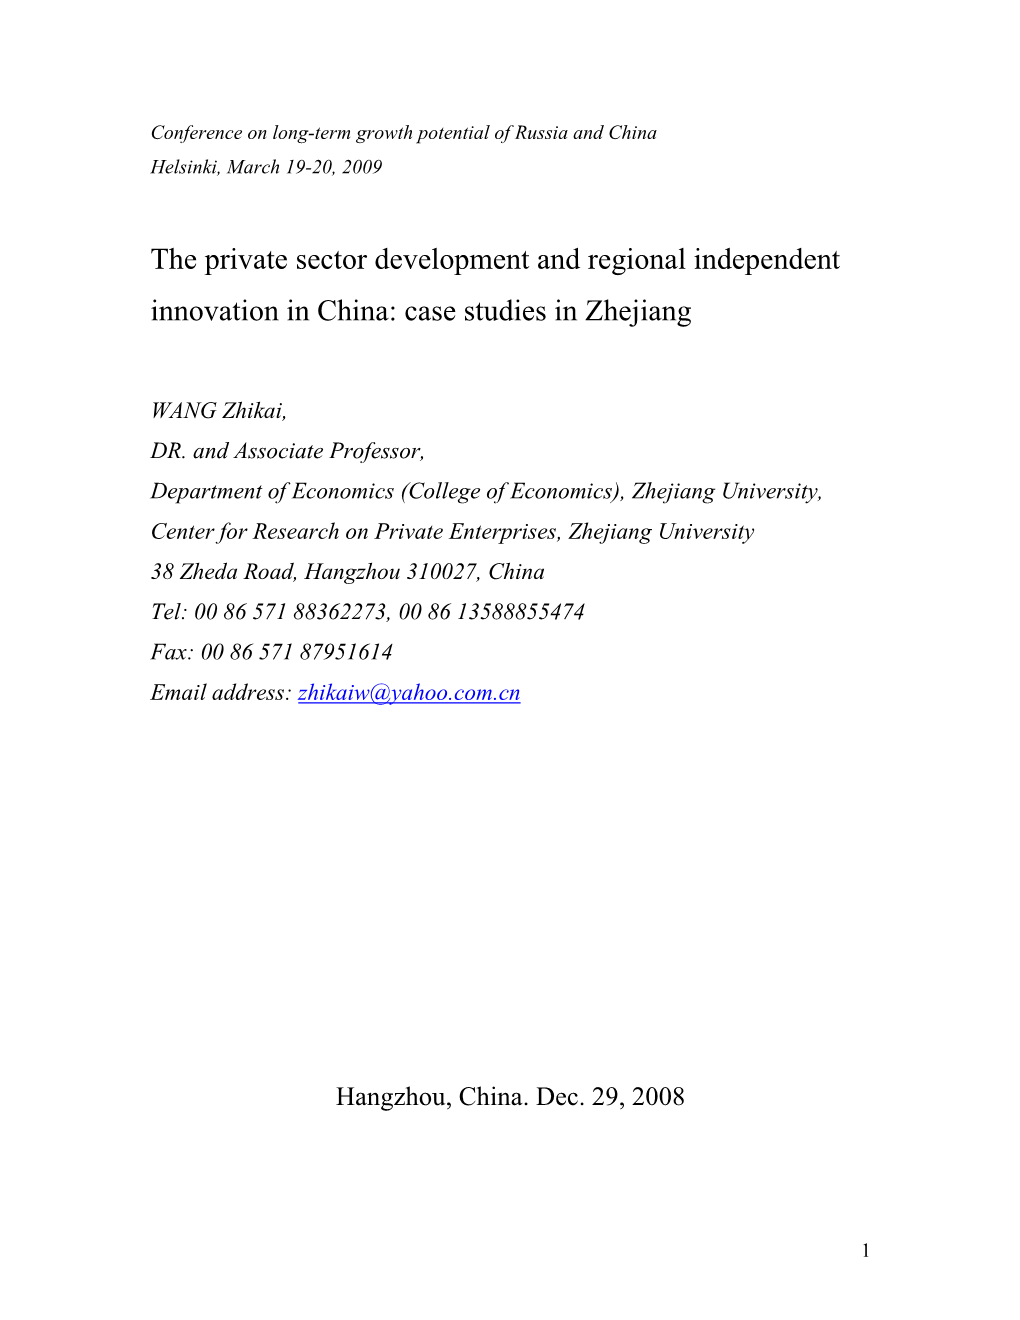 The Private Sector Development and Regional Independent Innovation in China: Case Studies in Zhejiang